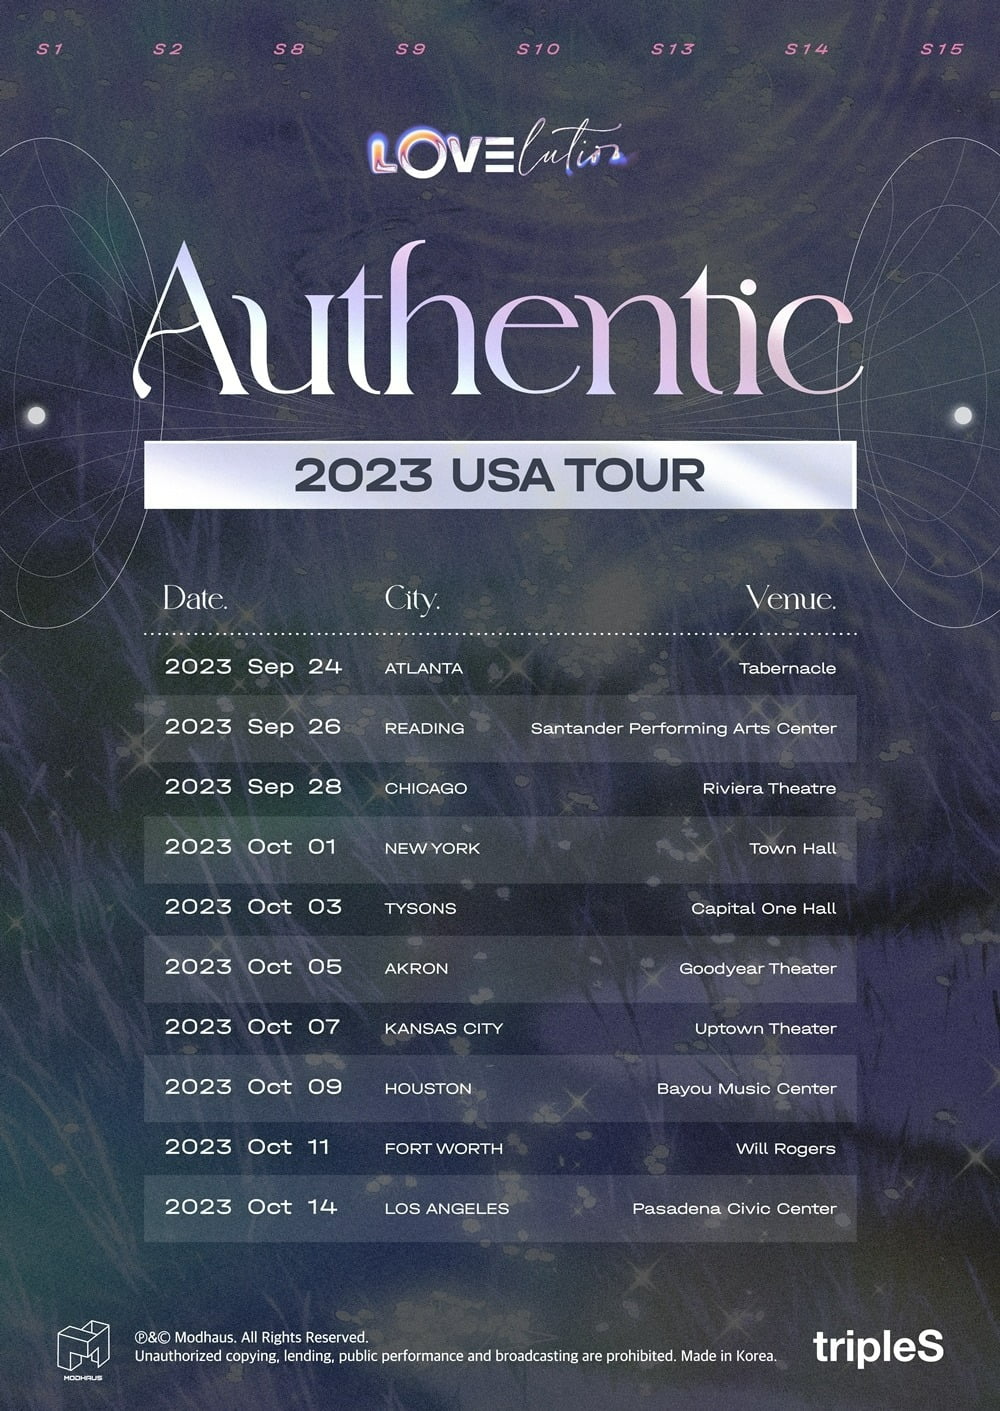 Triple S Lovetion begins their first world tour in 10 cities in the US